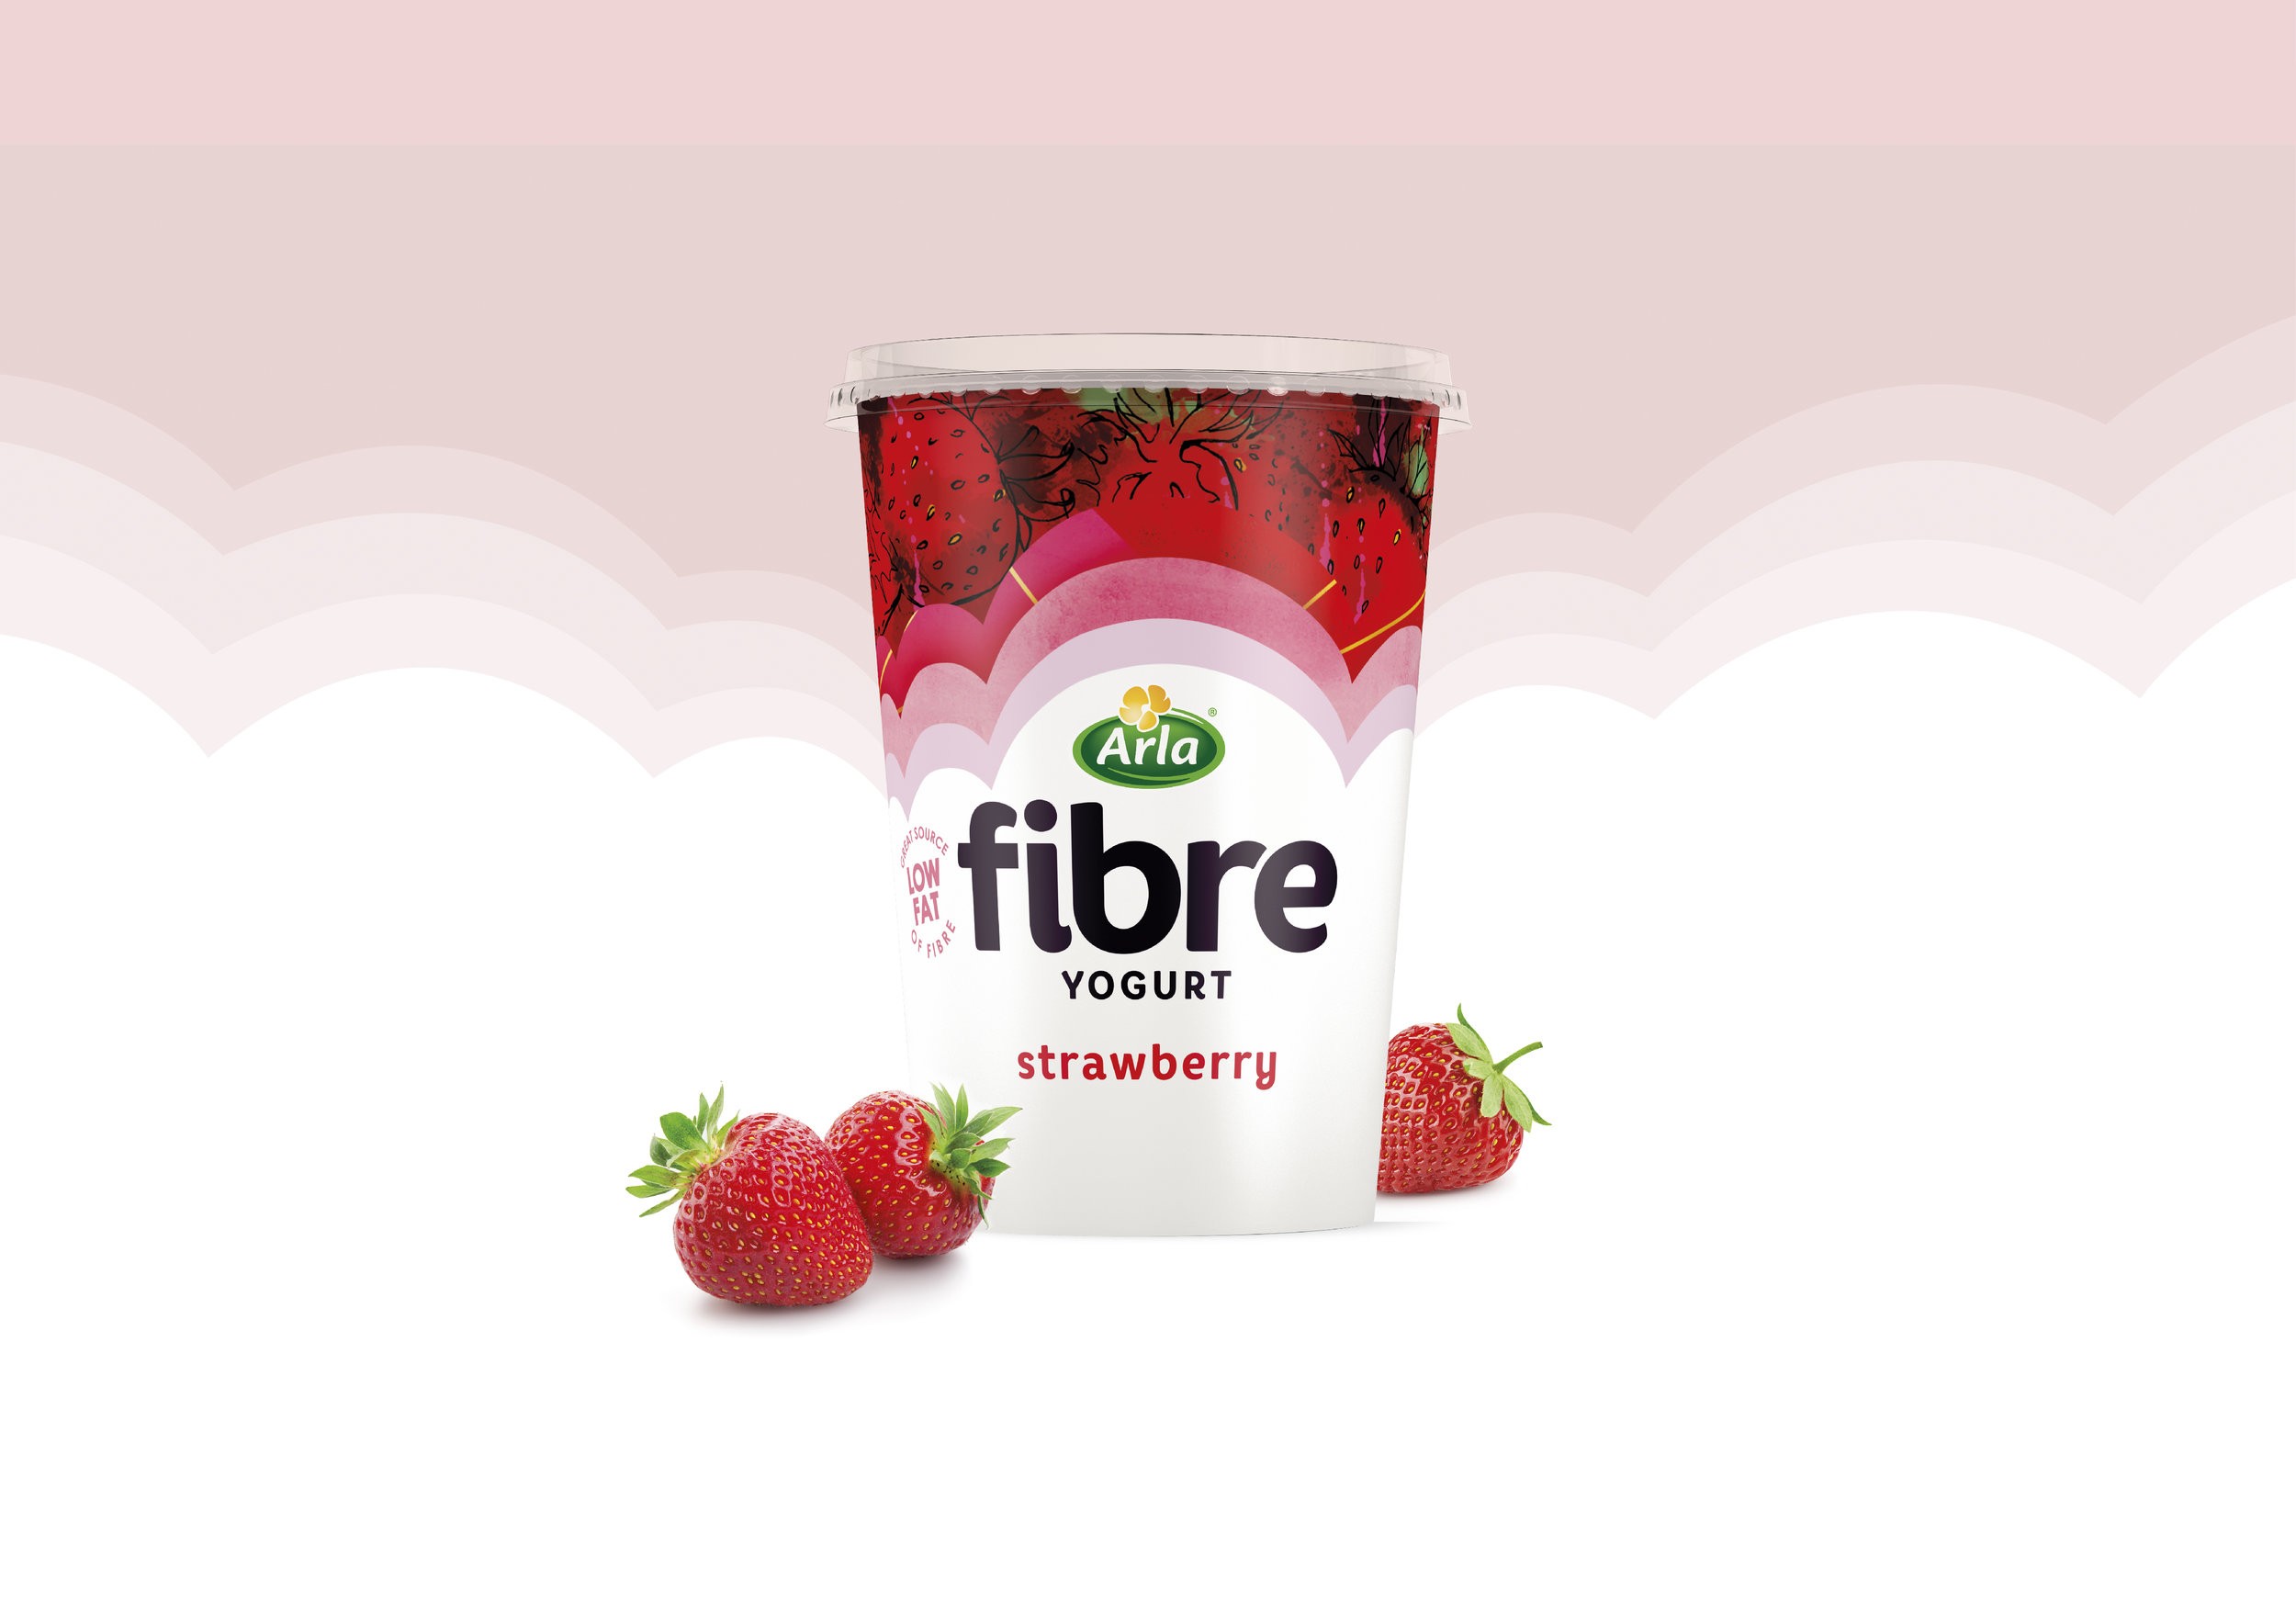 Abstract Fruit Illustrations and Patterns Used for Fibre Yogurts to be Launched in the UK by Arla